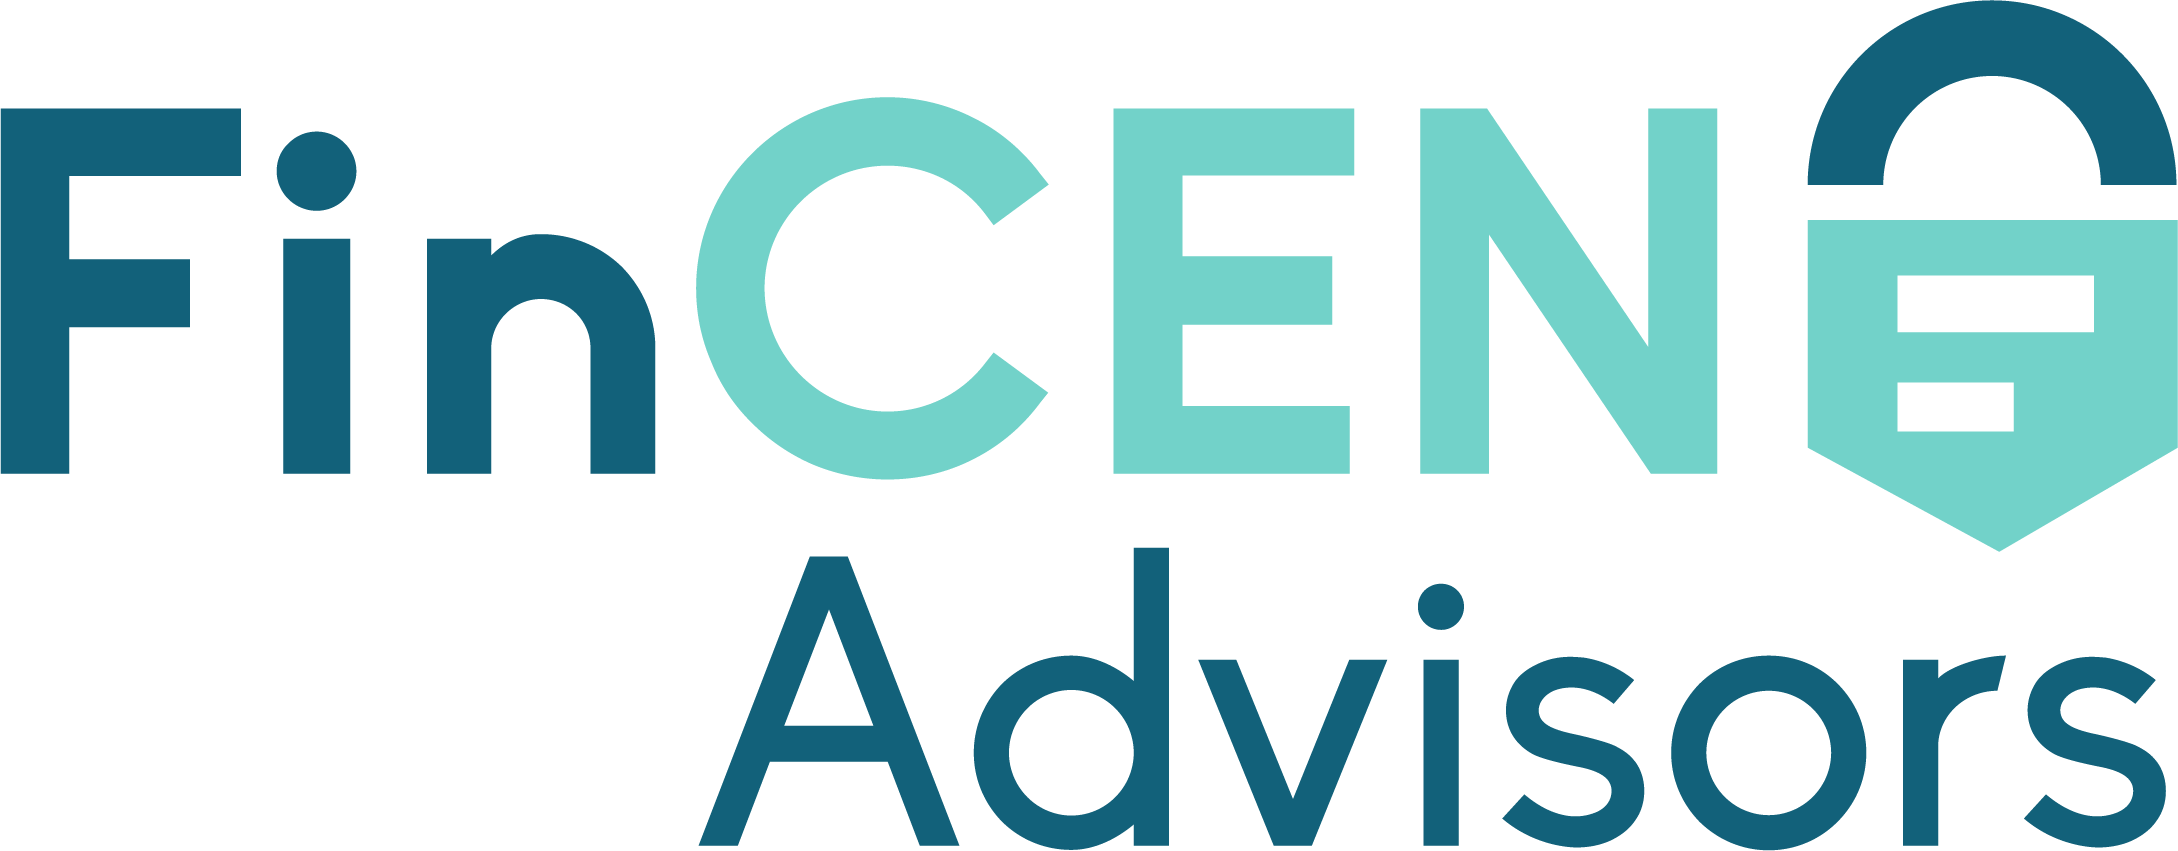 Logo of fincen advisors featuring stylized text and a geometric icon in shades of teal and blue on a dark green default kit background.